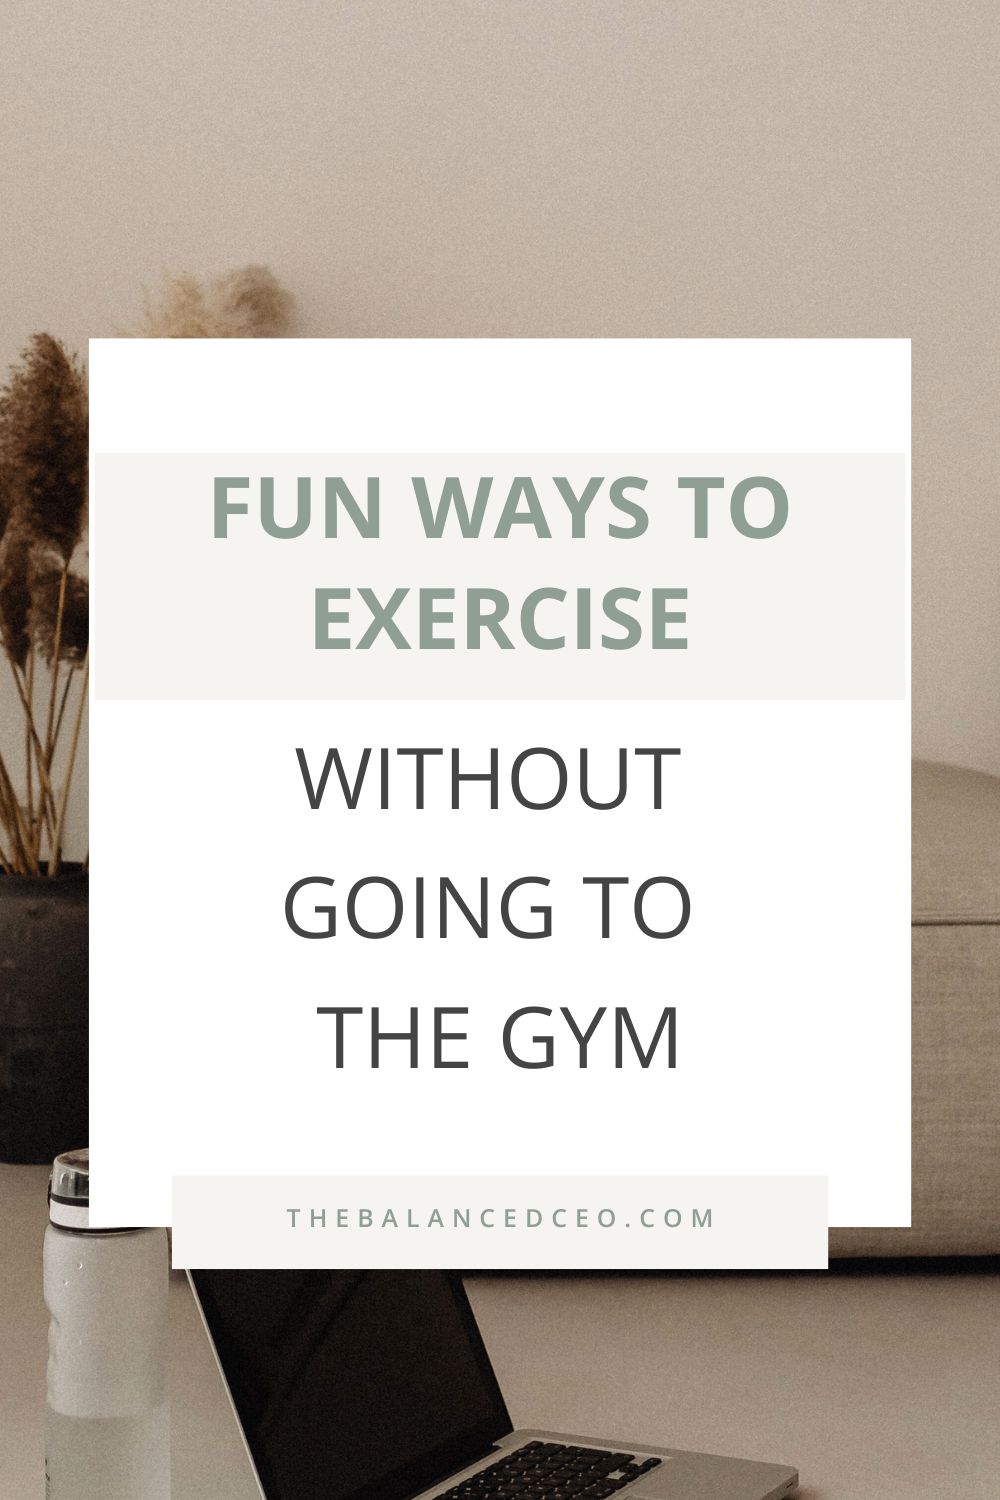 Fun Ways to Exercise Without Going to the Gym